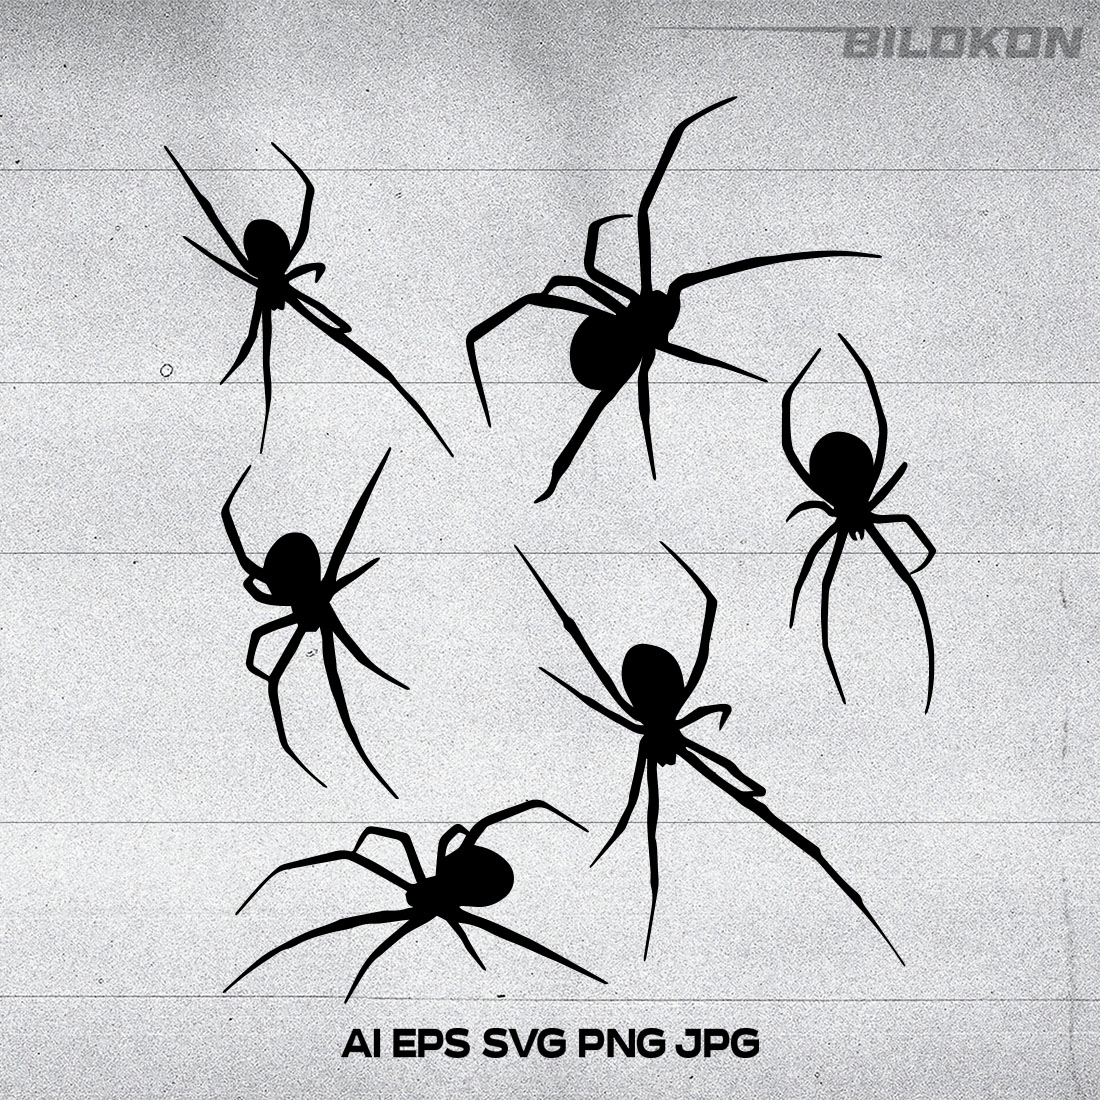 Group of black spider silhouettes on a white background.